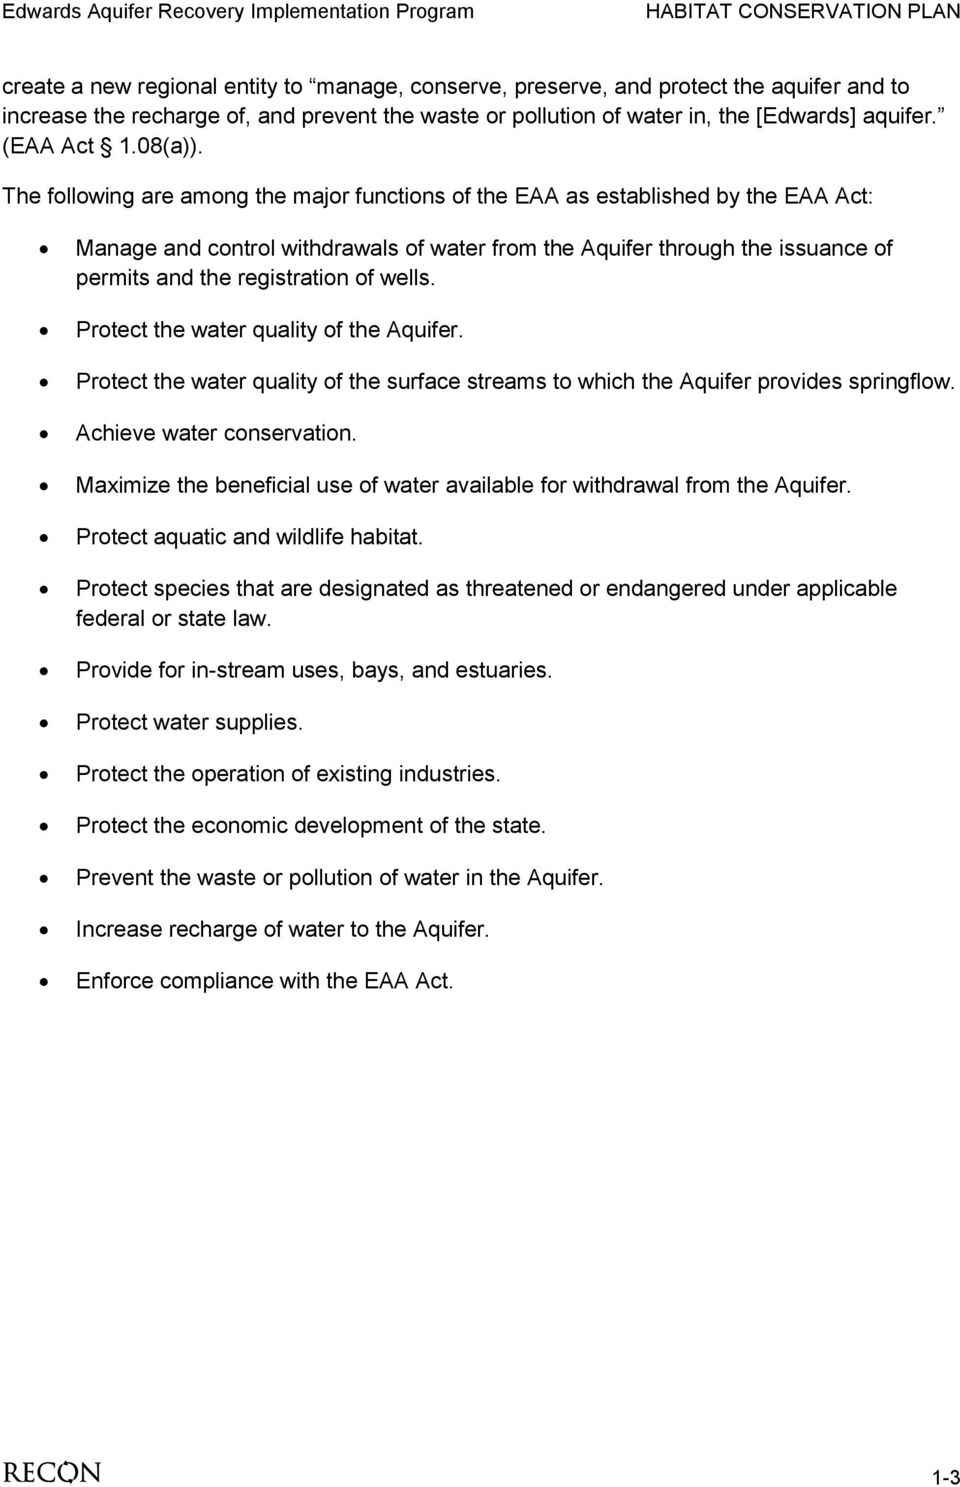 The following are among the major functions of the EAA as established by the EAA Act: Manage and control withdrawals of water from the Aquifer through the issuance of permits and the registration of